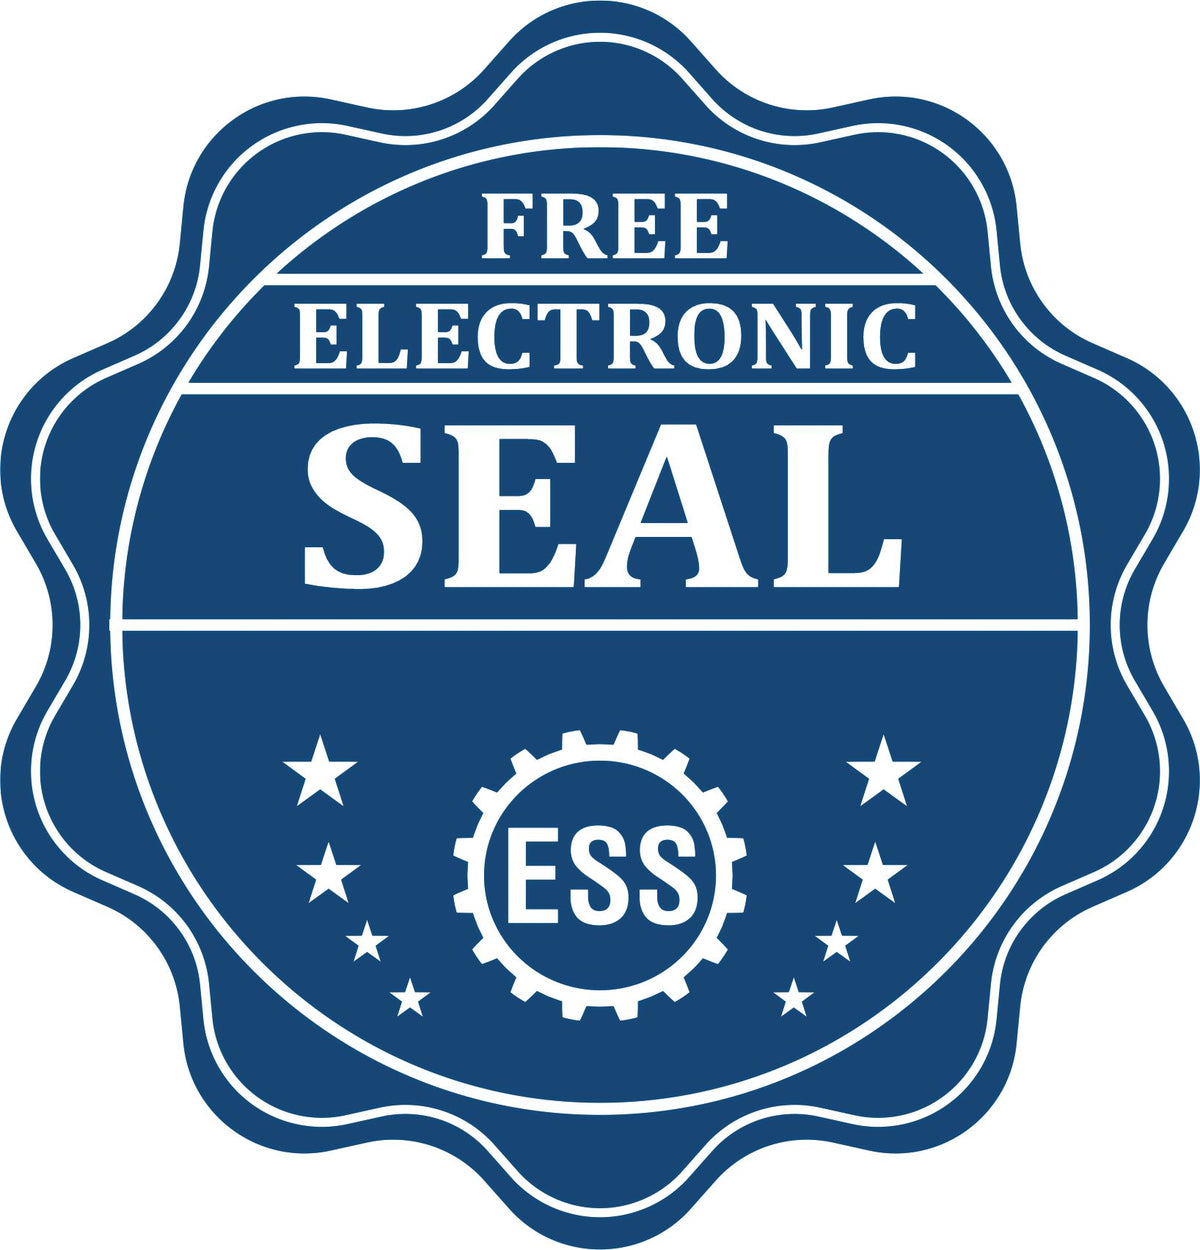 A badge showing a free electronic seal for the Slim Pre-Inked Oklahoma Land Surveyor Seal Stamp with stars and the ESS gear on the emblem.